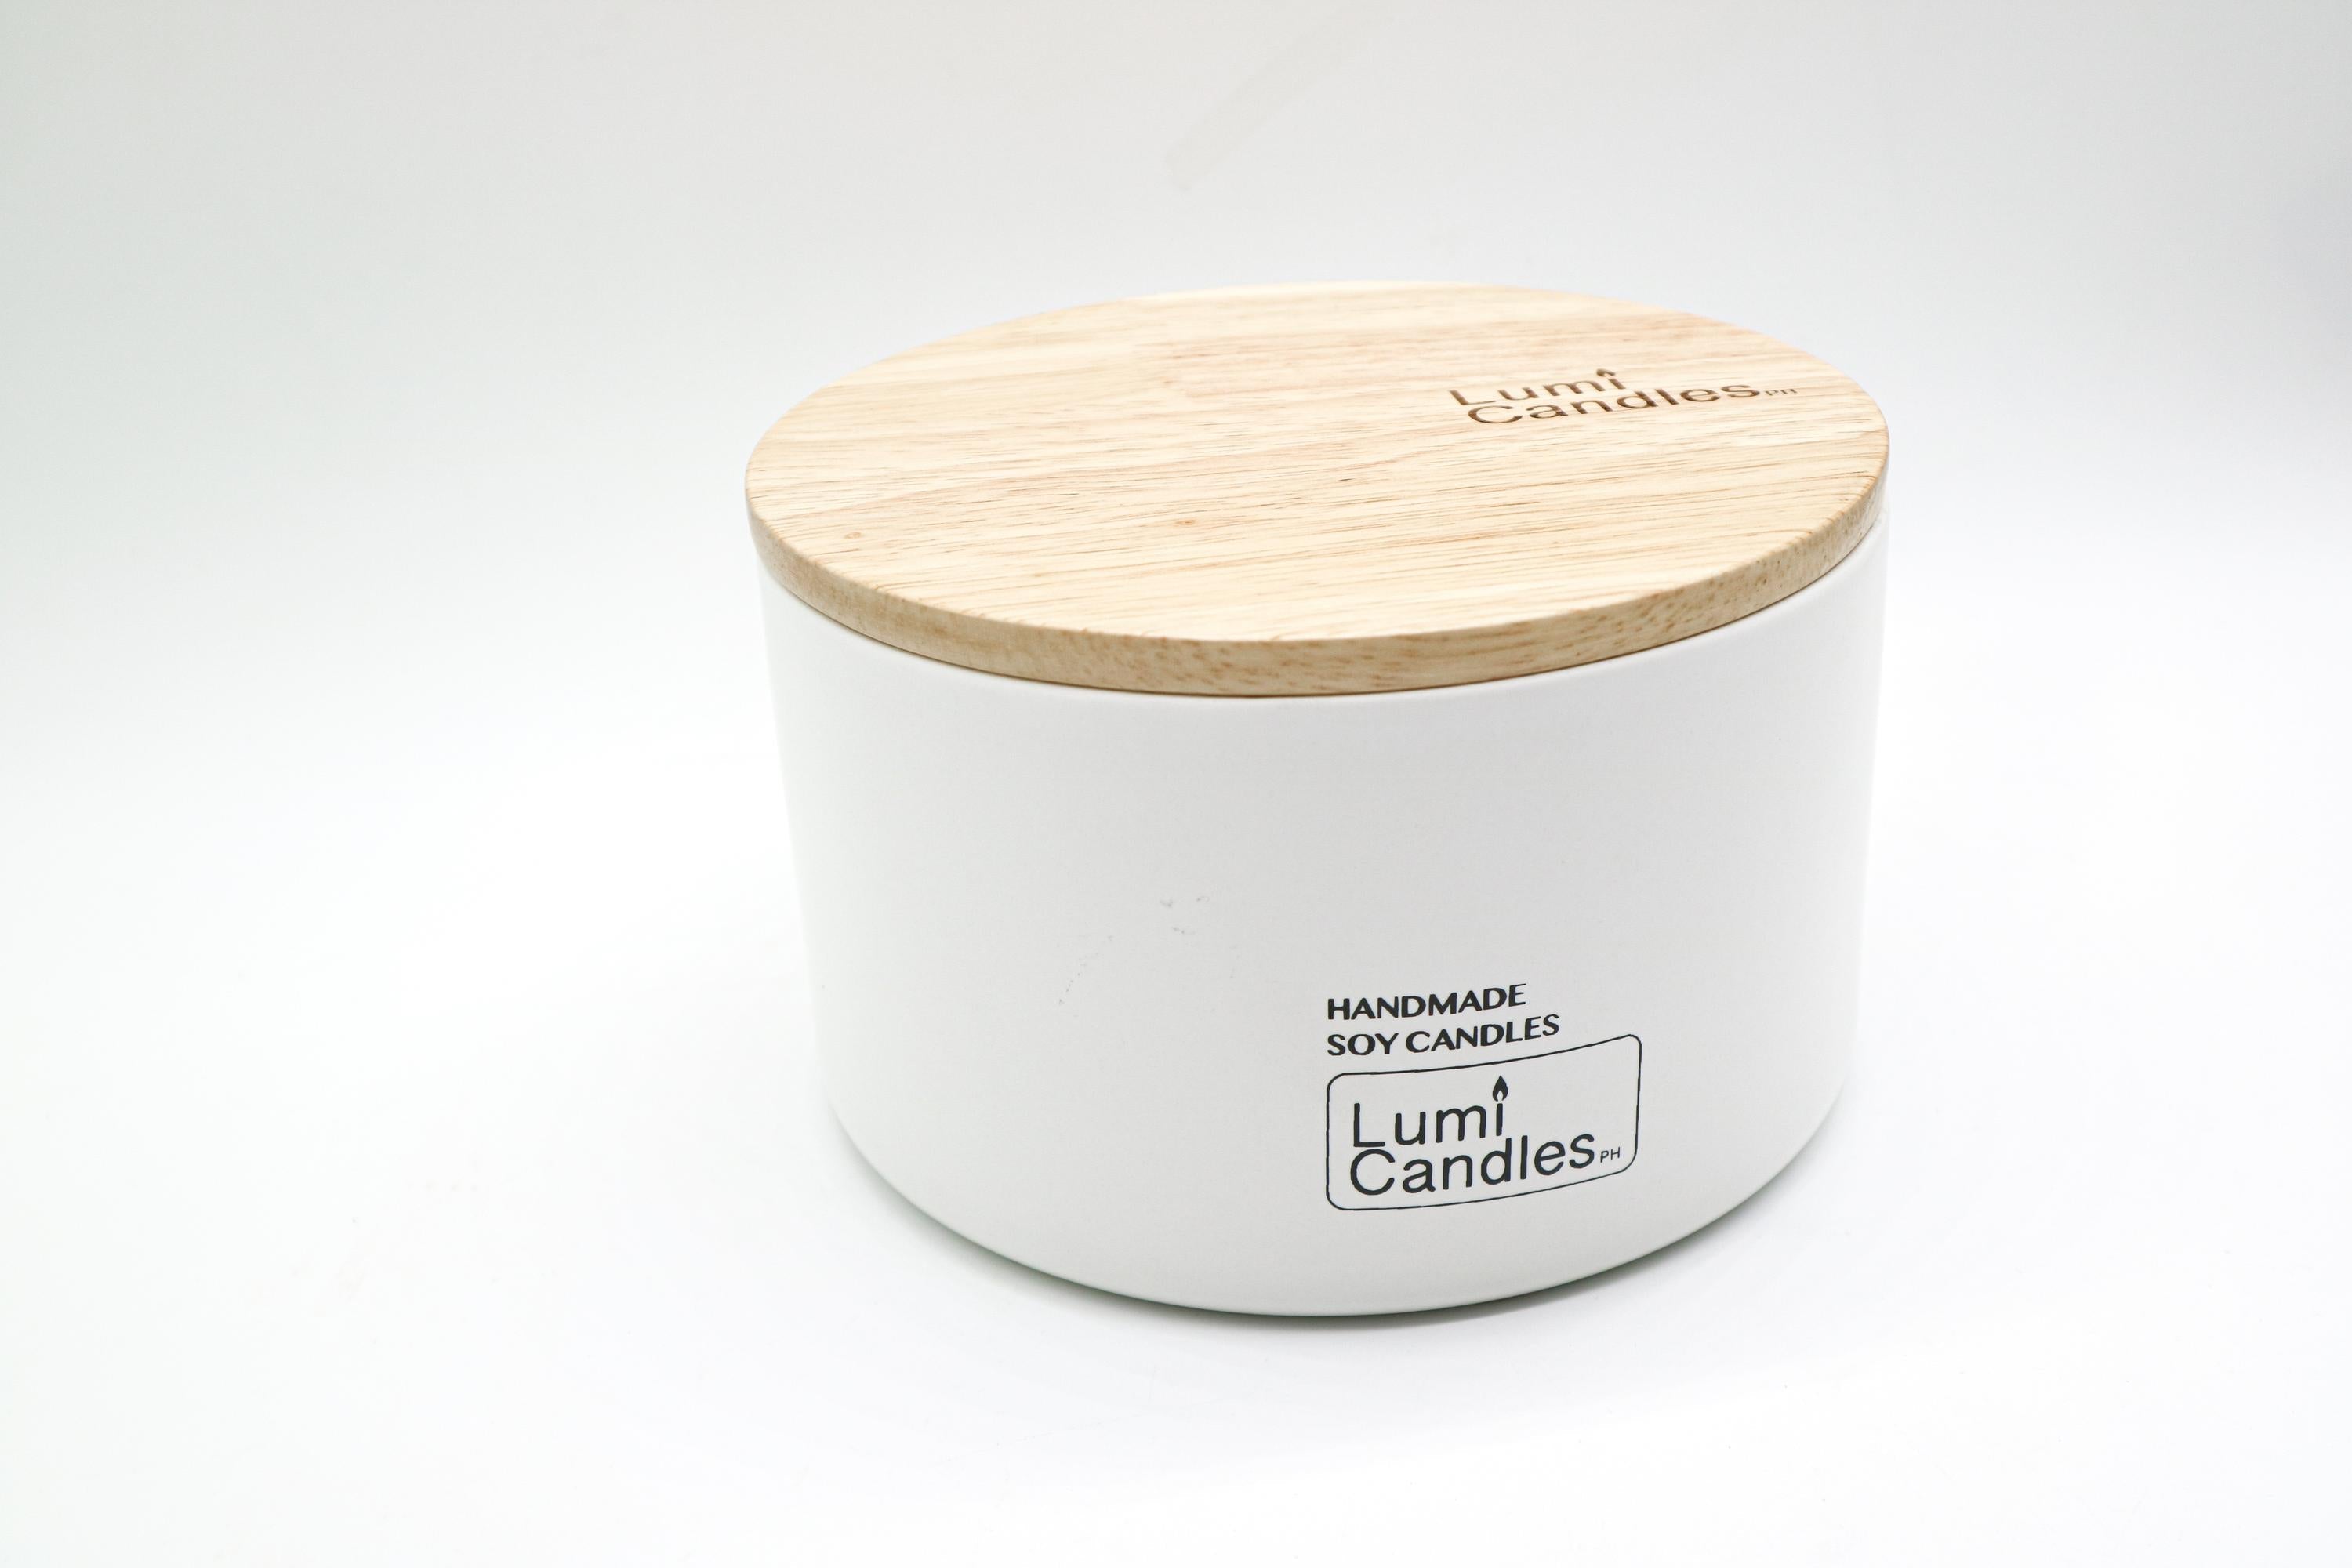 Handmade 800 ML Ceramic Soy Candle by LUMI Candles PH